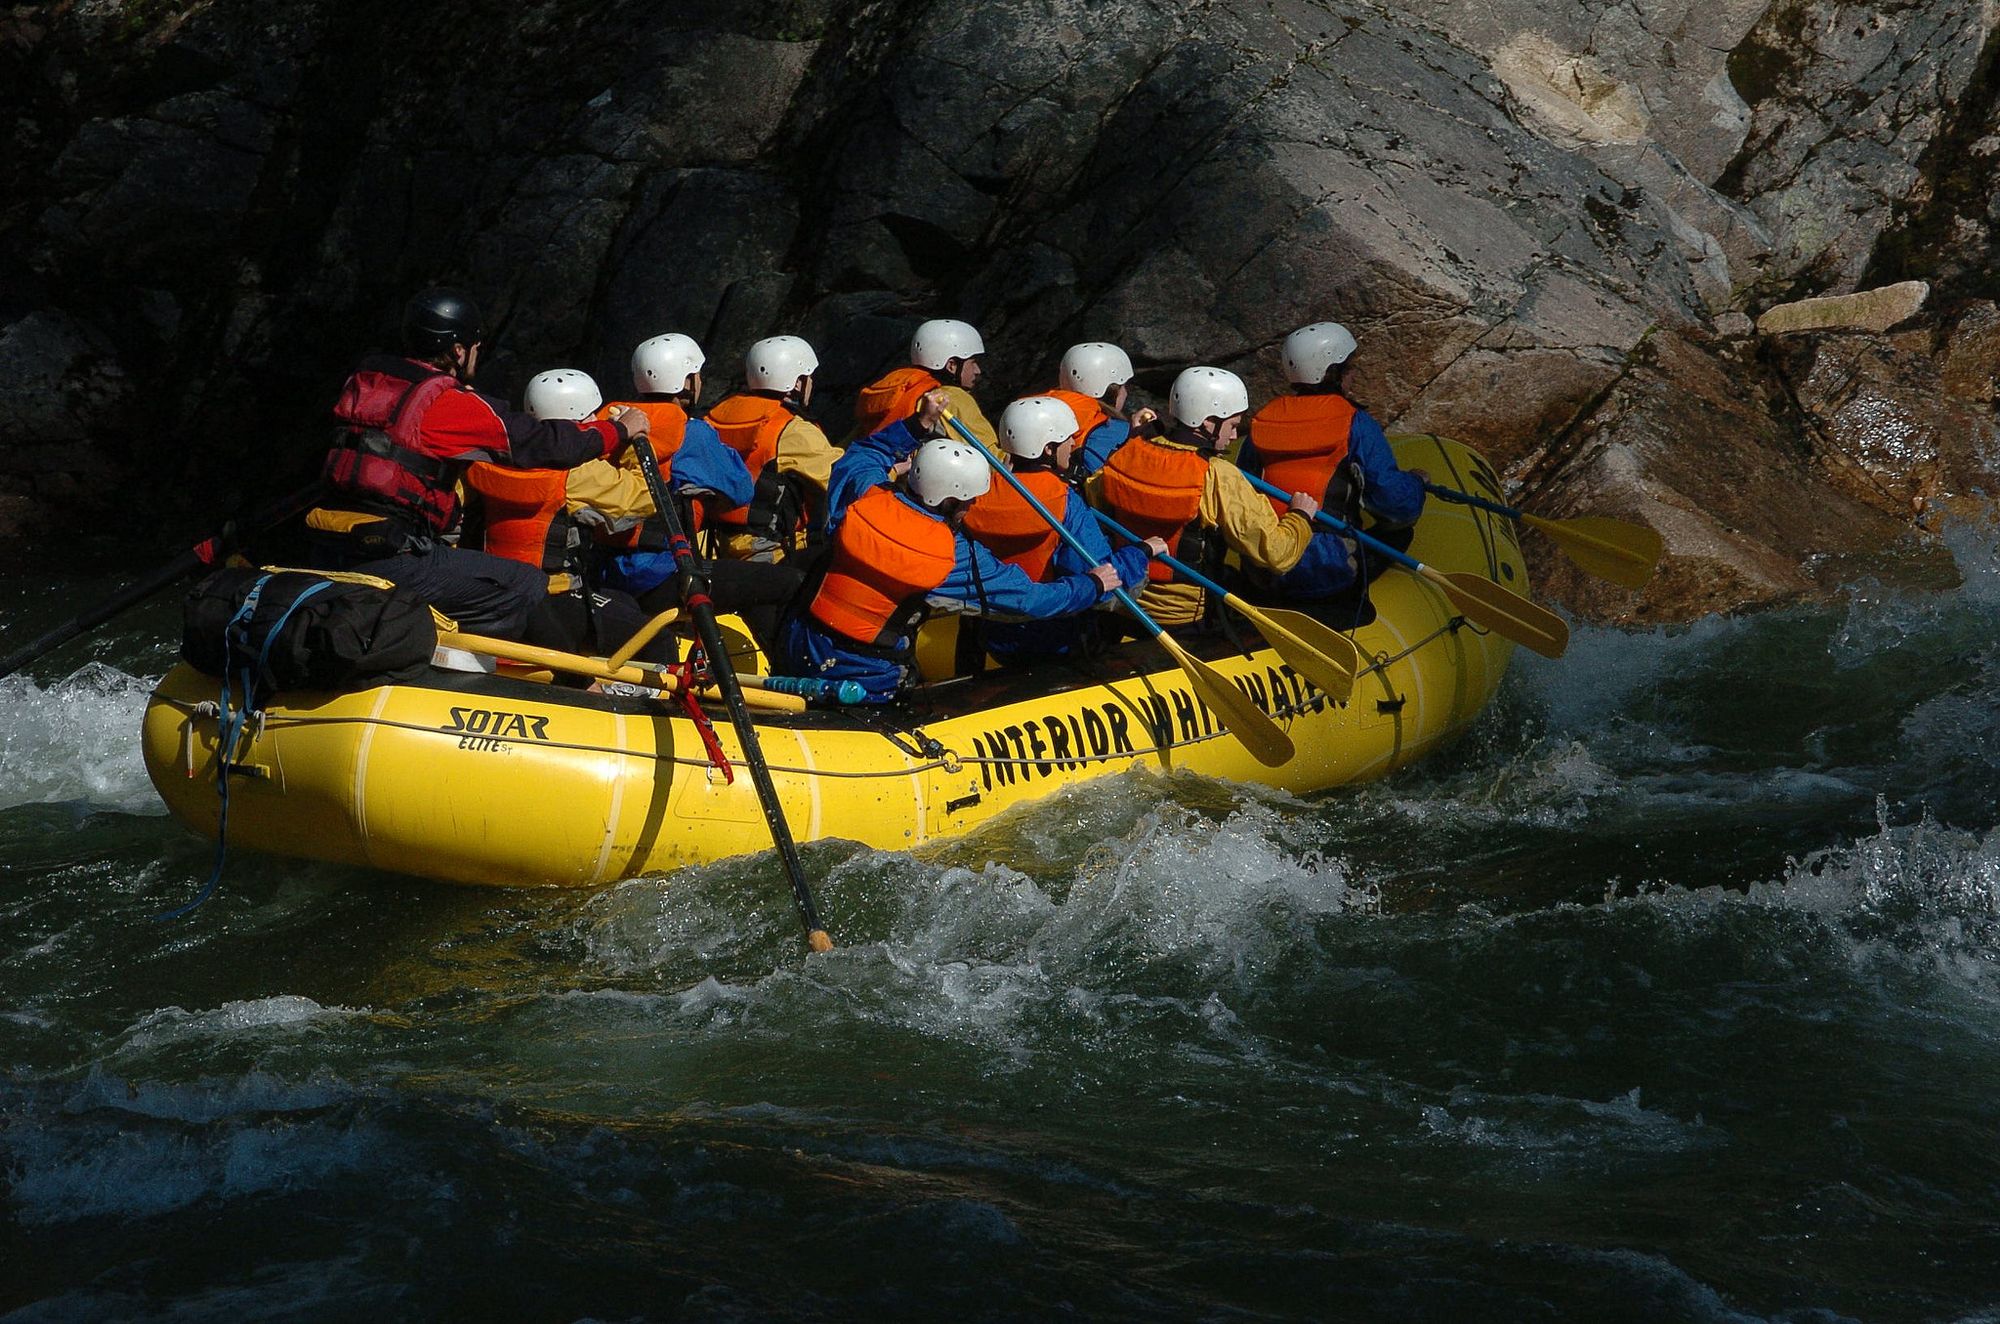 Are you ready to experience the Water Rafting in Cairns?